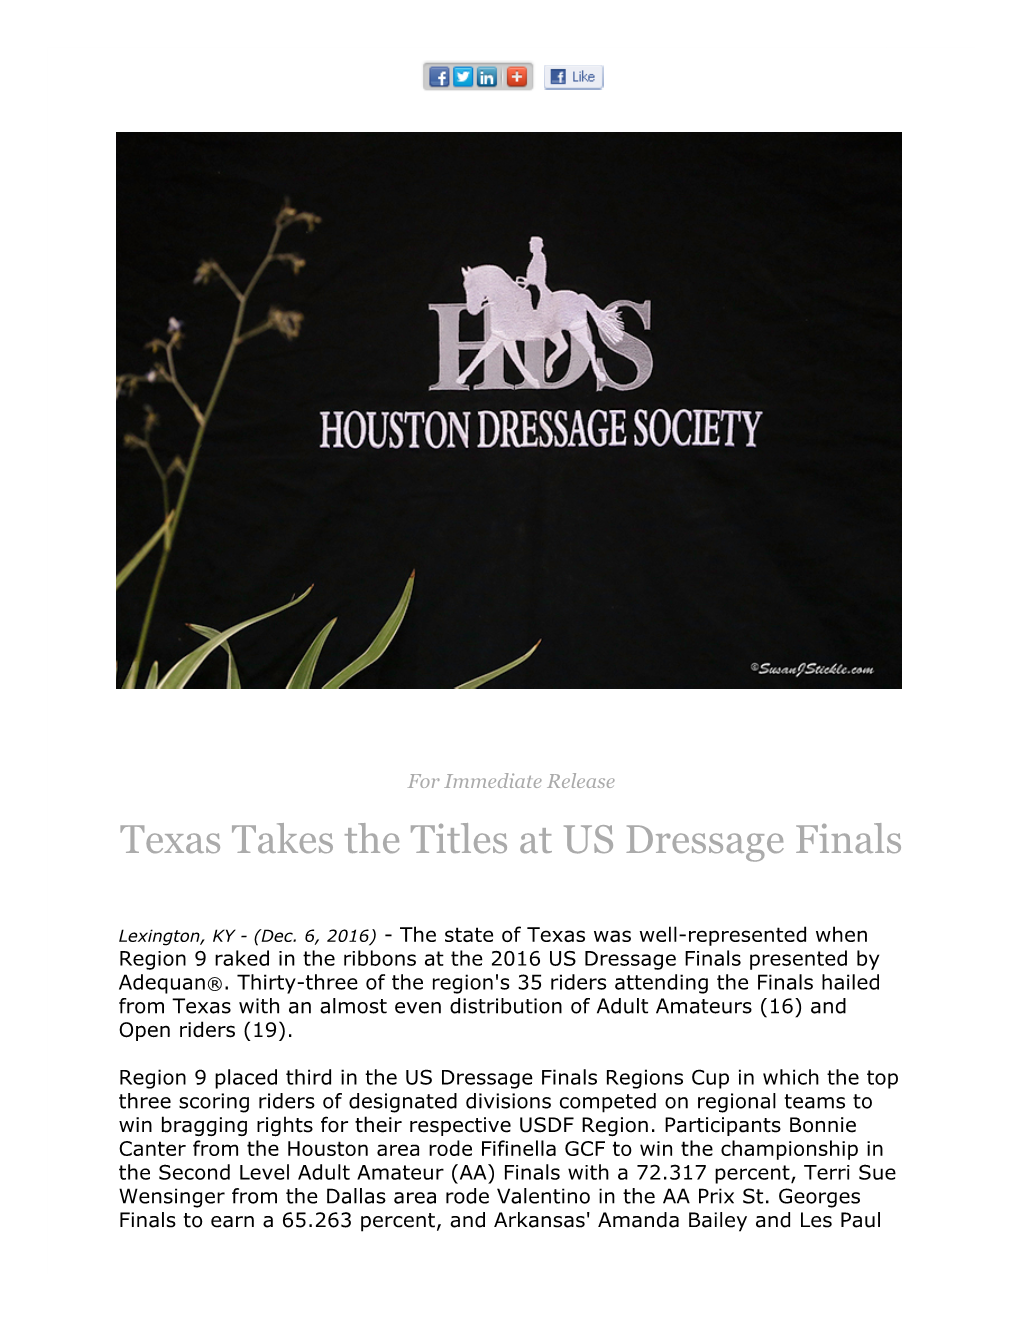 Texas Takes the Titles at US Dressage Finals